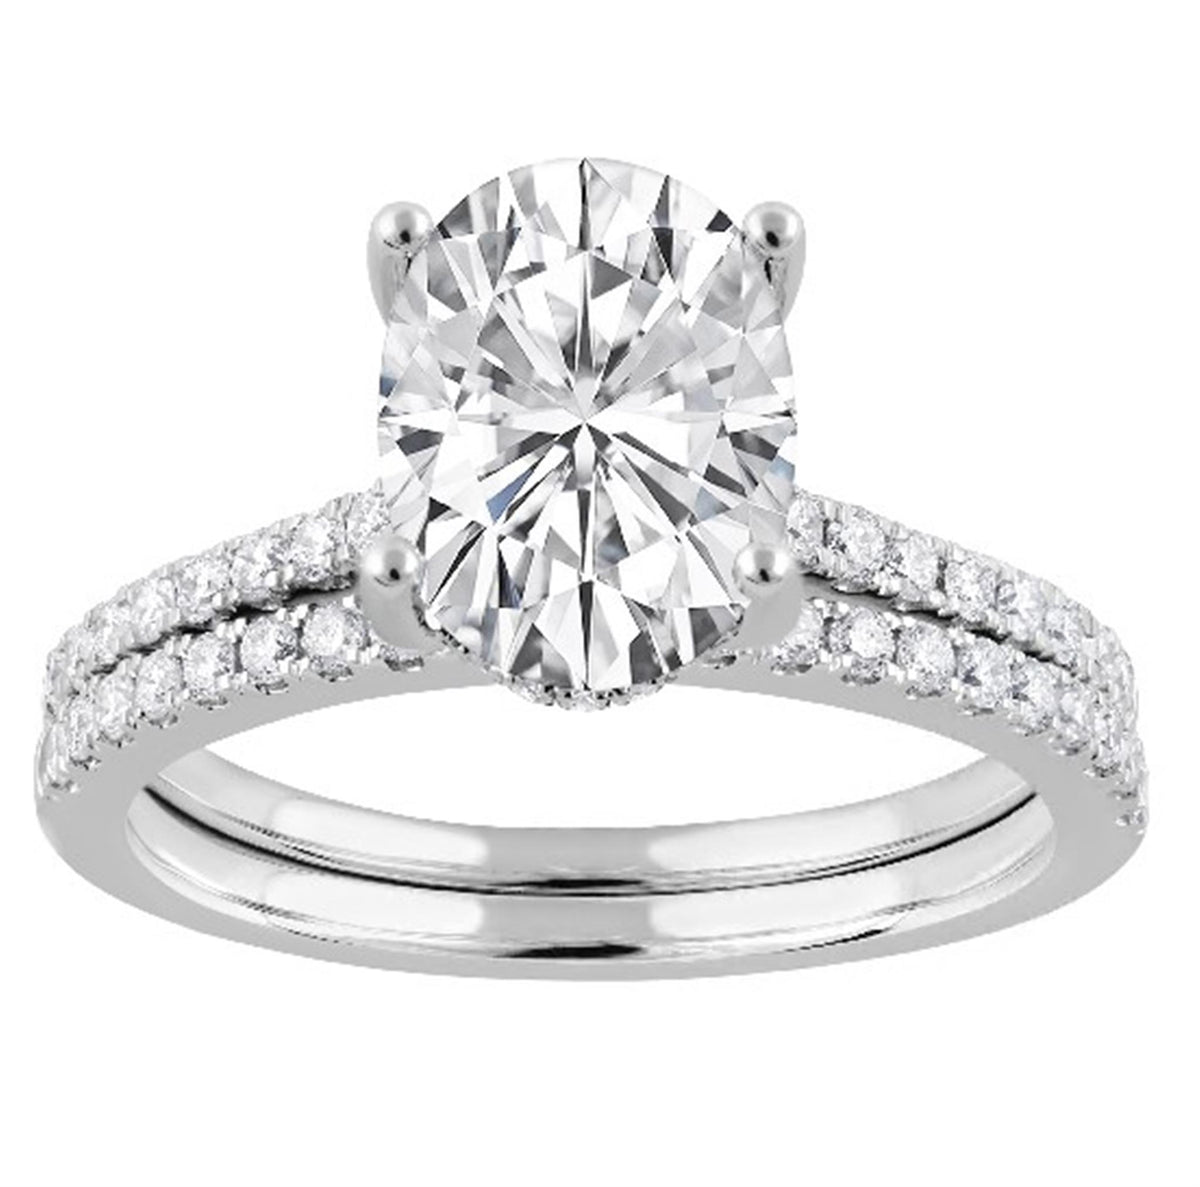 14Kt White Gold Classic Prong Engagement And Wedding Ring Set With 3.14ct Lab-Grown Center Diamond